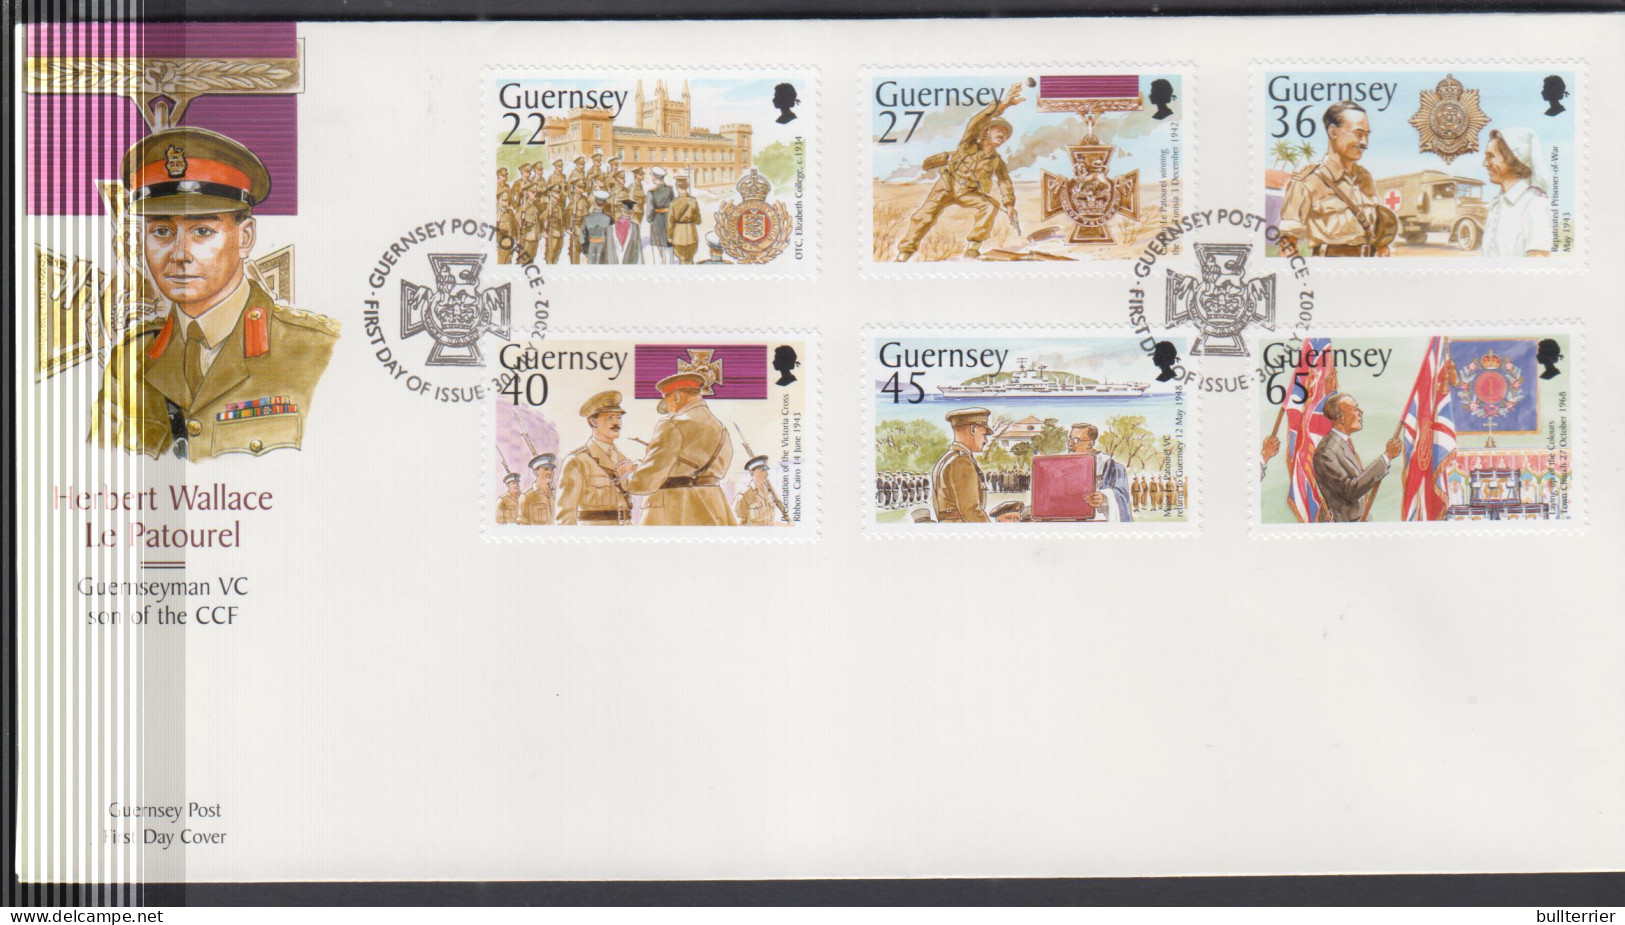 GUERNSEY - 2002 - LE PATOURAL  SET OF 6 ON ILLUSTRATED FDC  - Guernesey